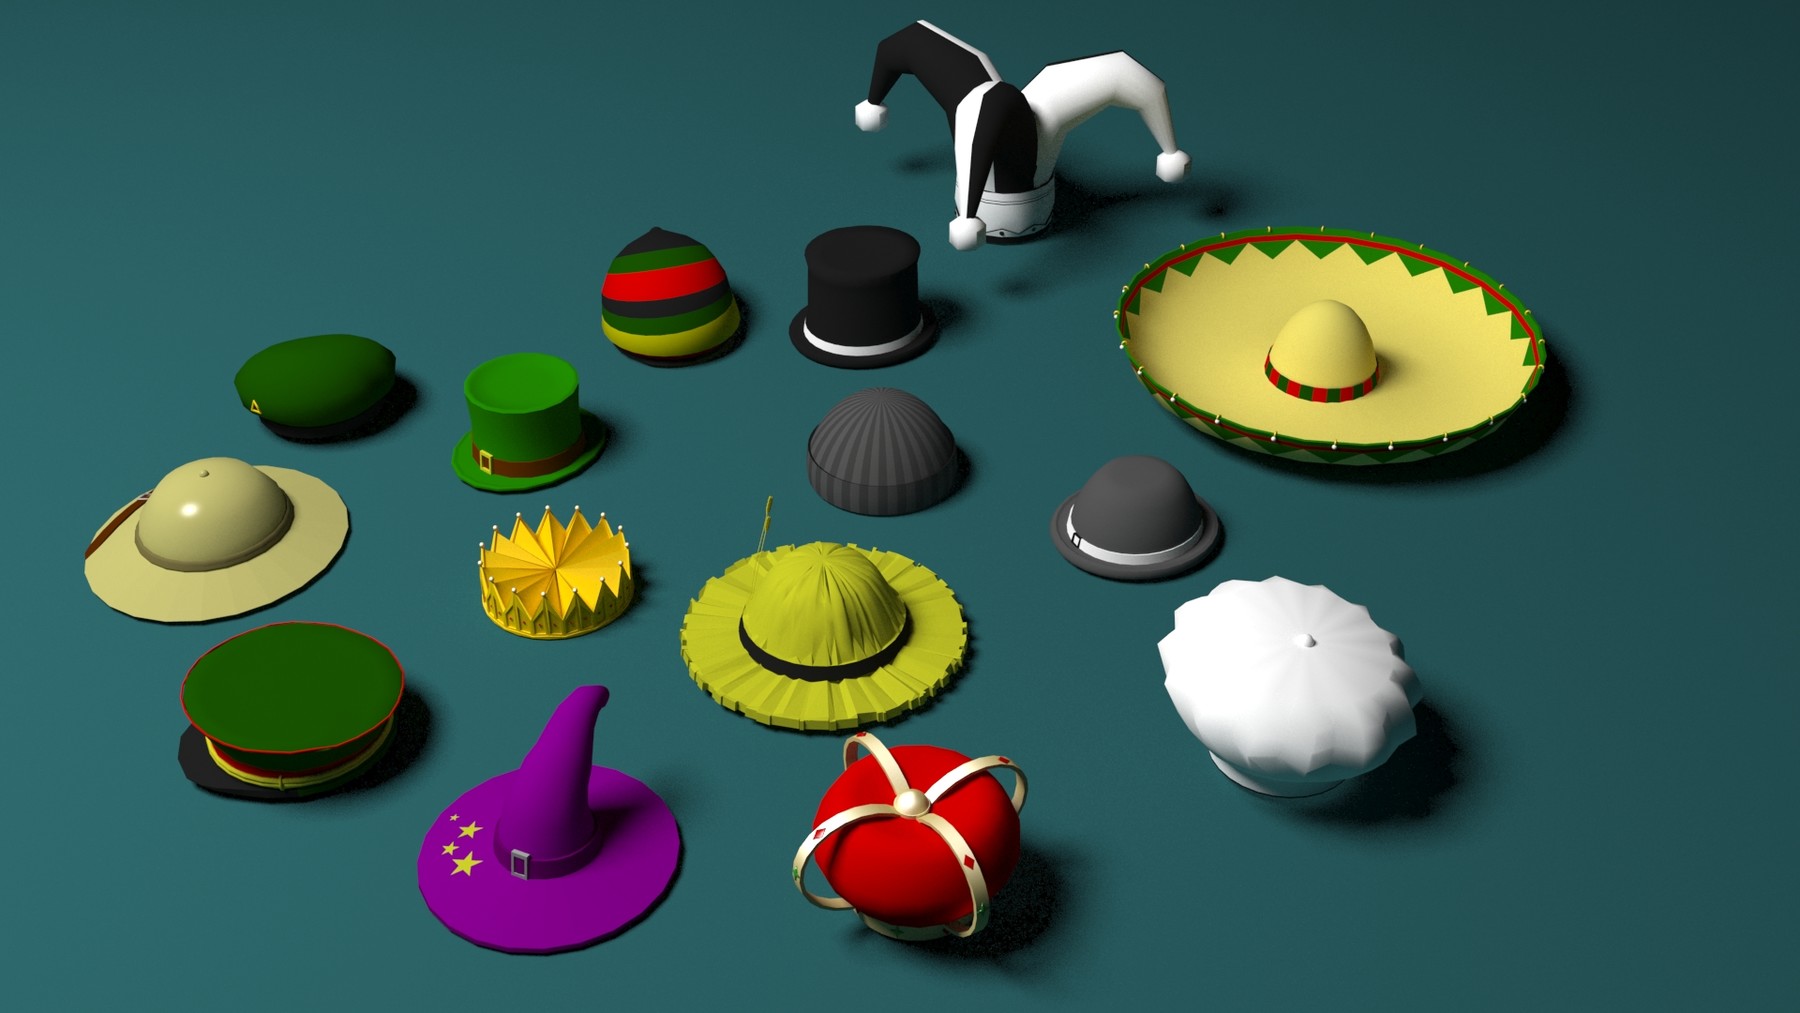 Hats pack. Low Poly шляпа 3д модель. Low Poly hat.